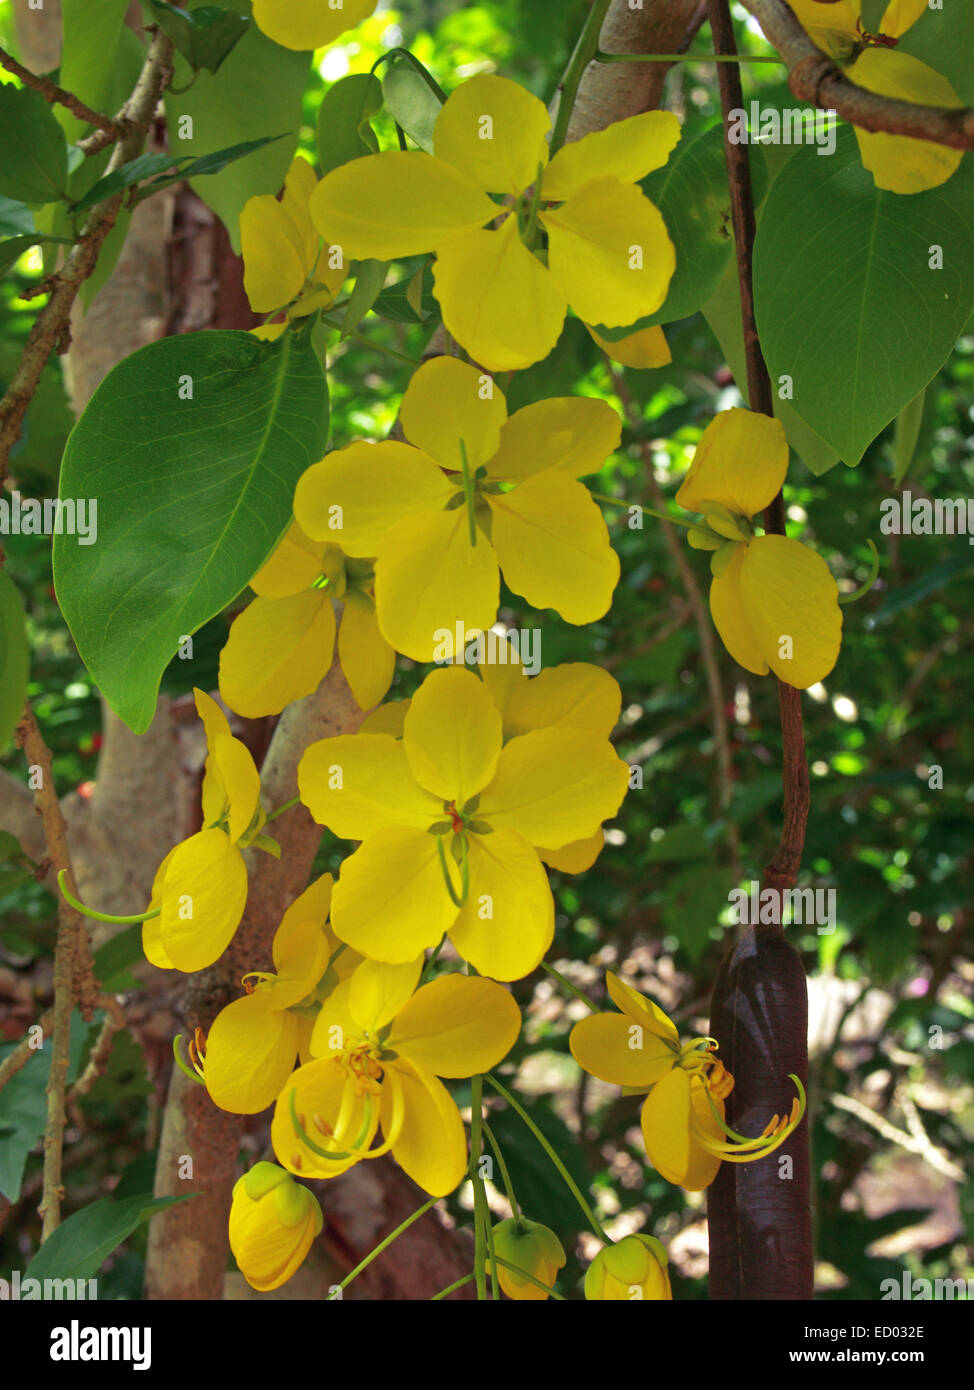 Raceme of large golden yellow flowers and emerald green leaves of Cassia fistula, Golden Shower tree, floral emblem of Thailand Stock Photo